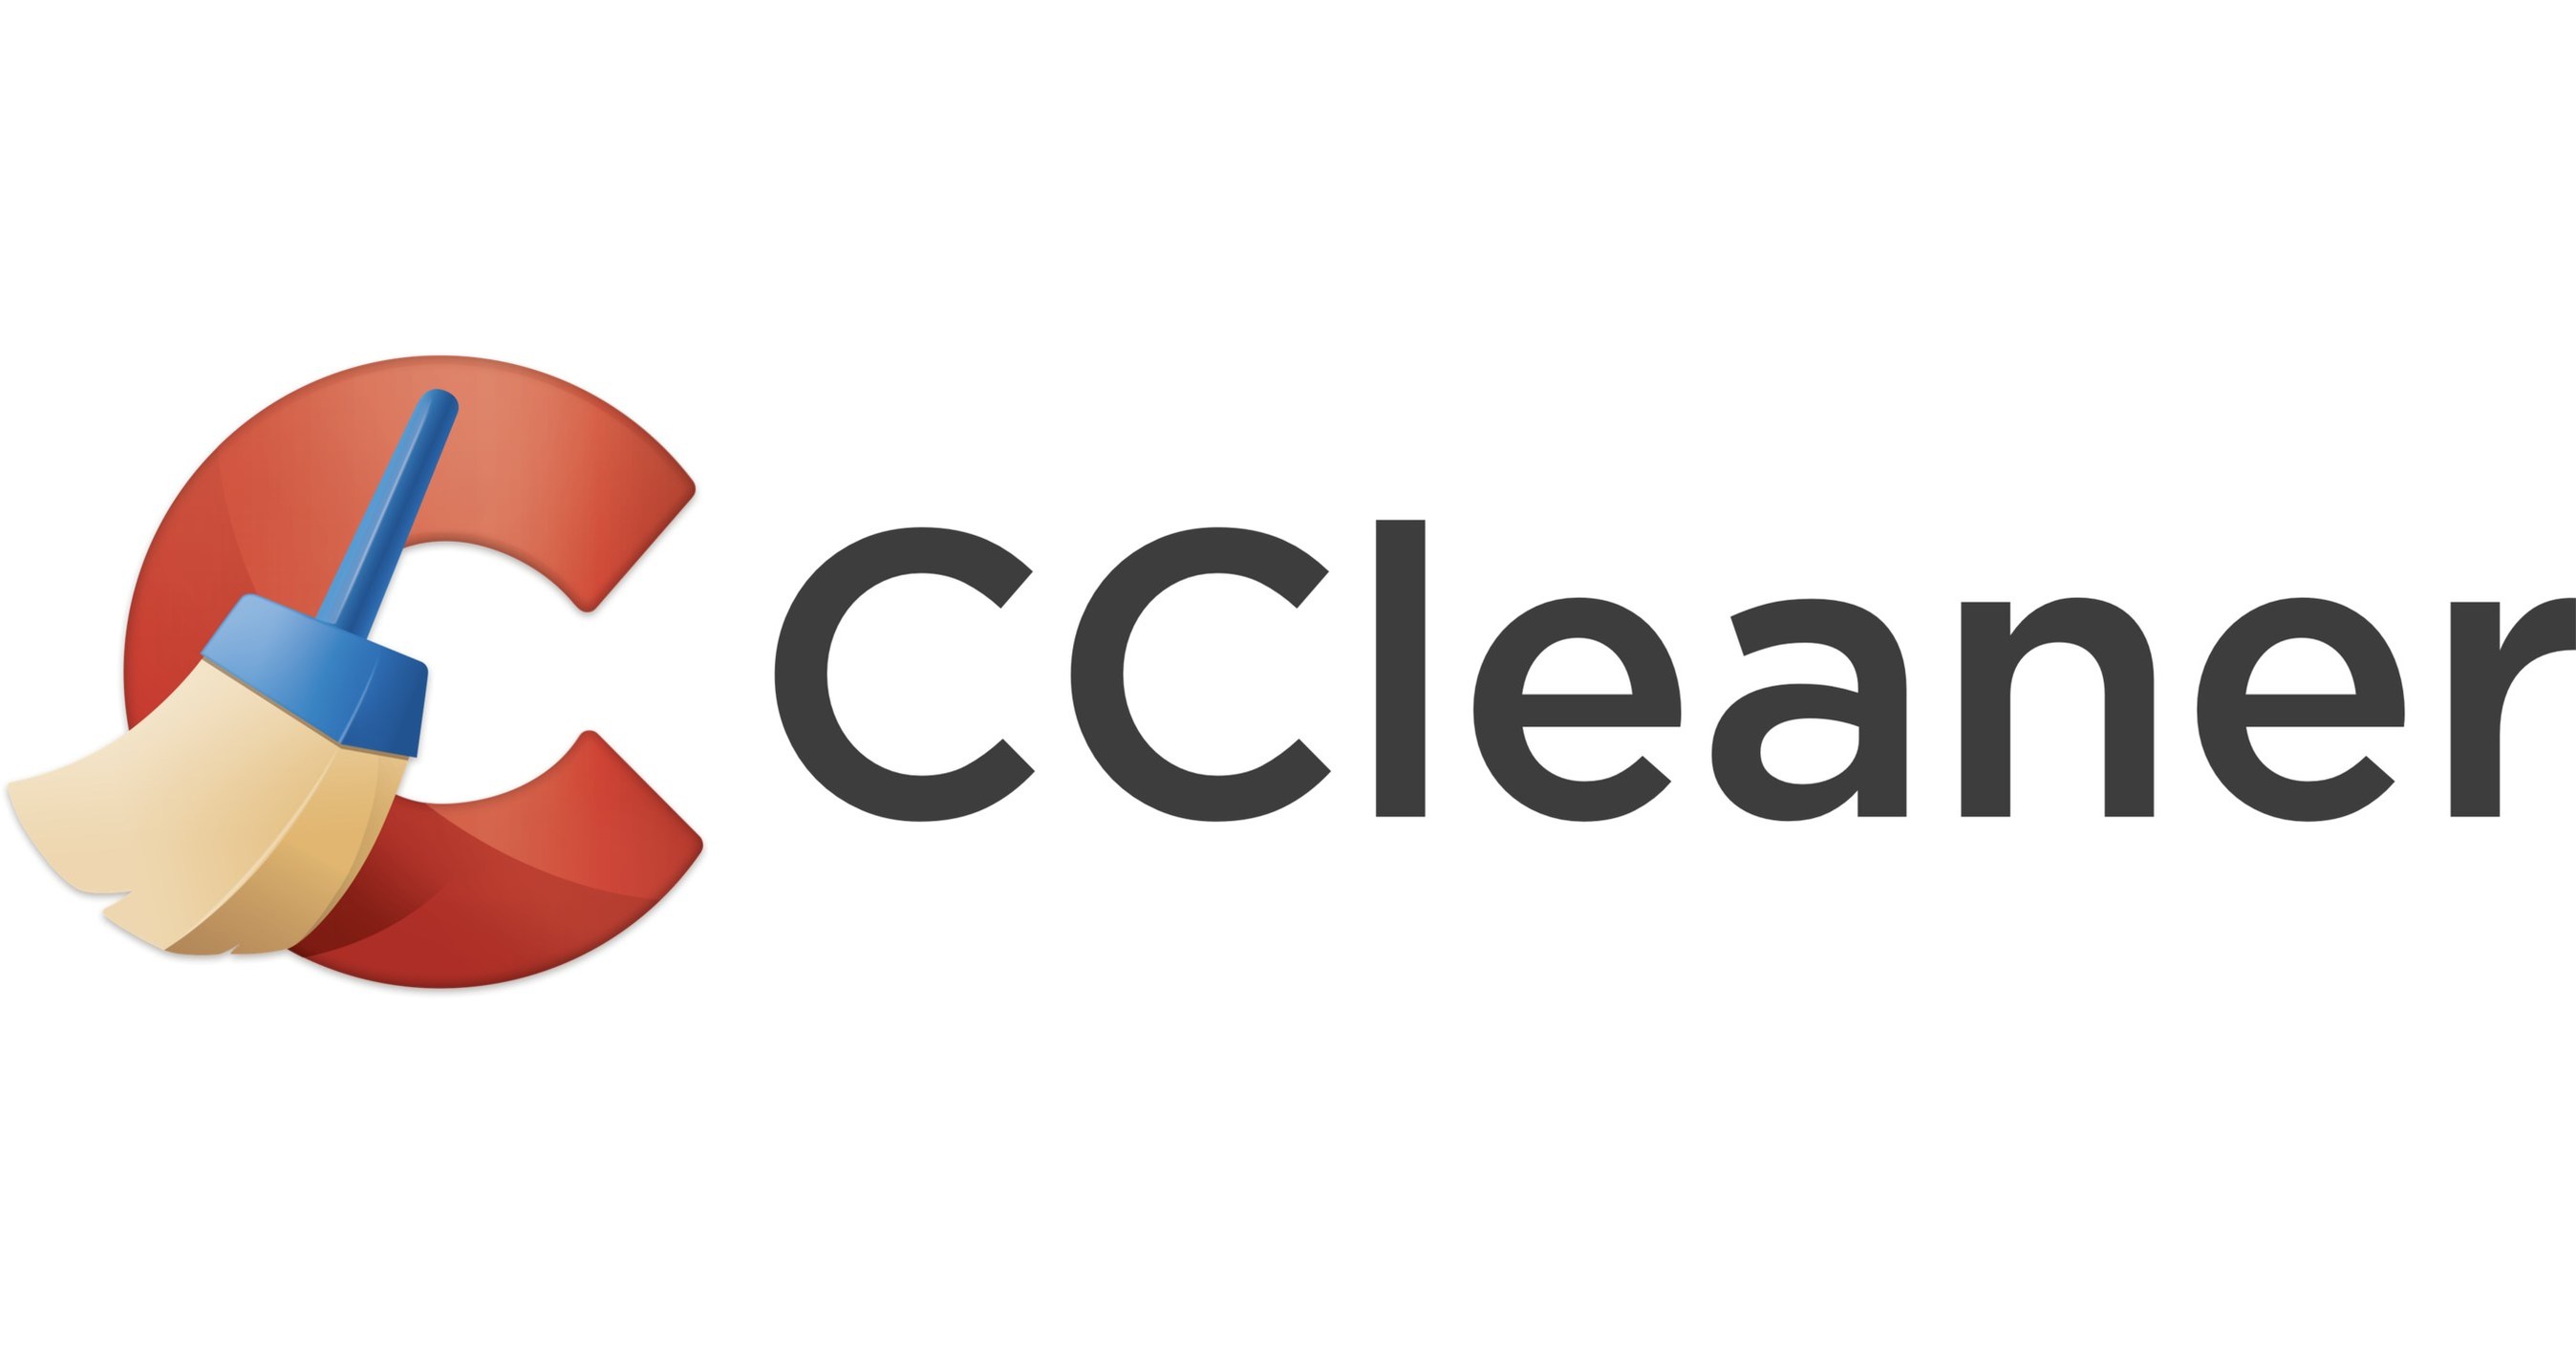 ccleaner free download official website